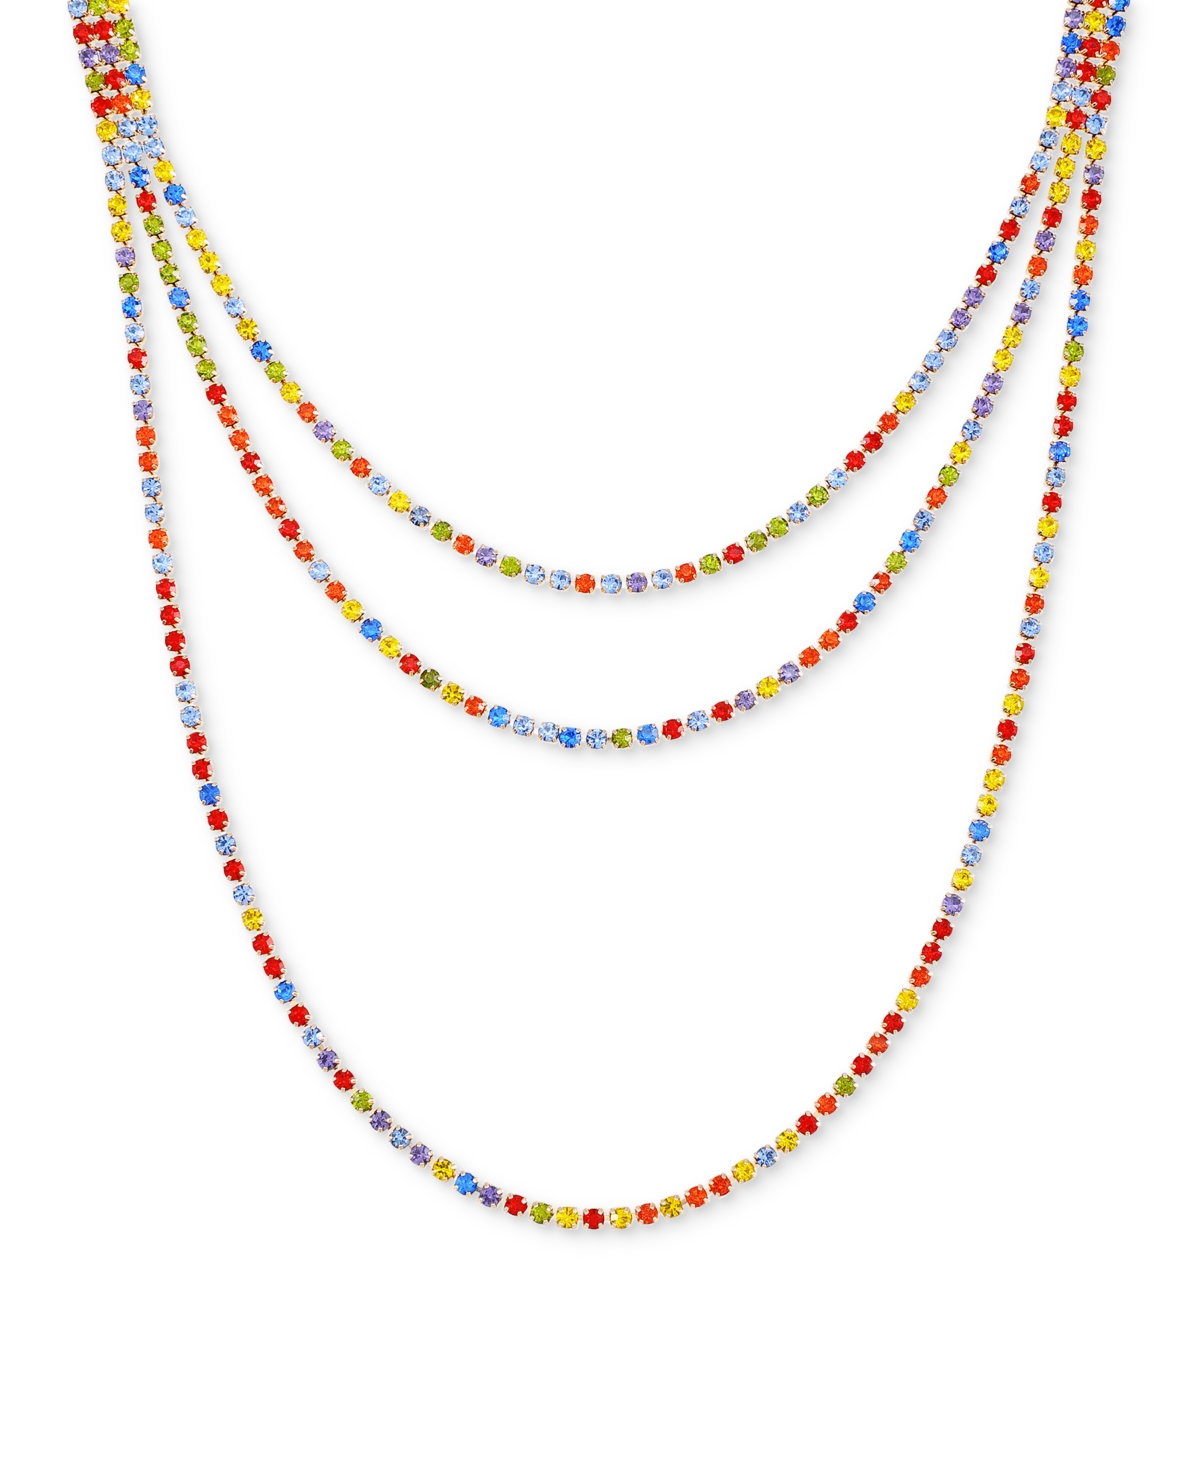 Shop Guess Gold-tone Multicolor Rhinestone Three-row Tennis Necklace, 24" + 2" Extender